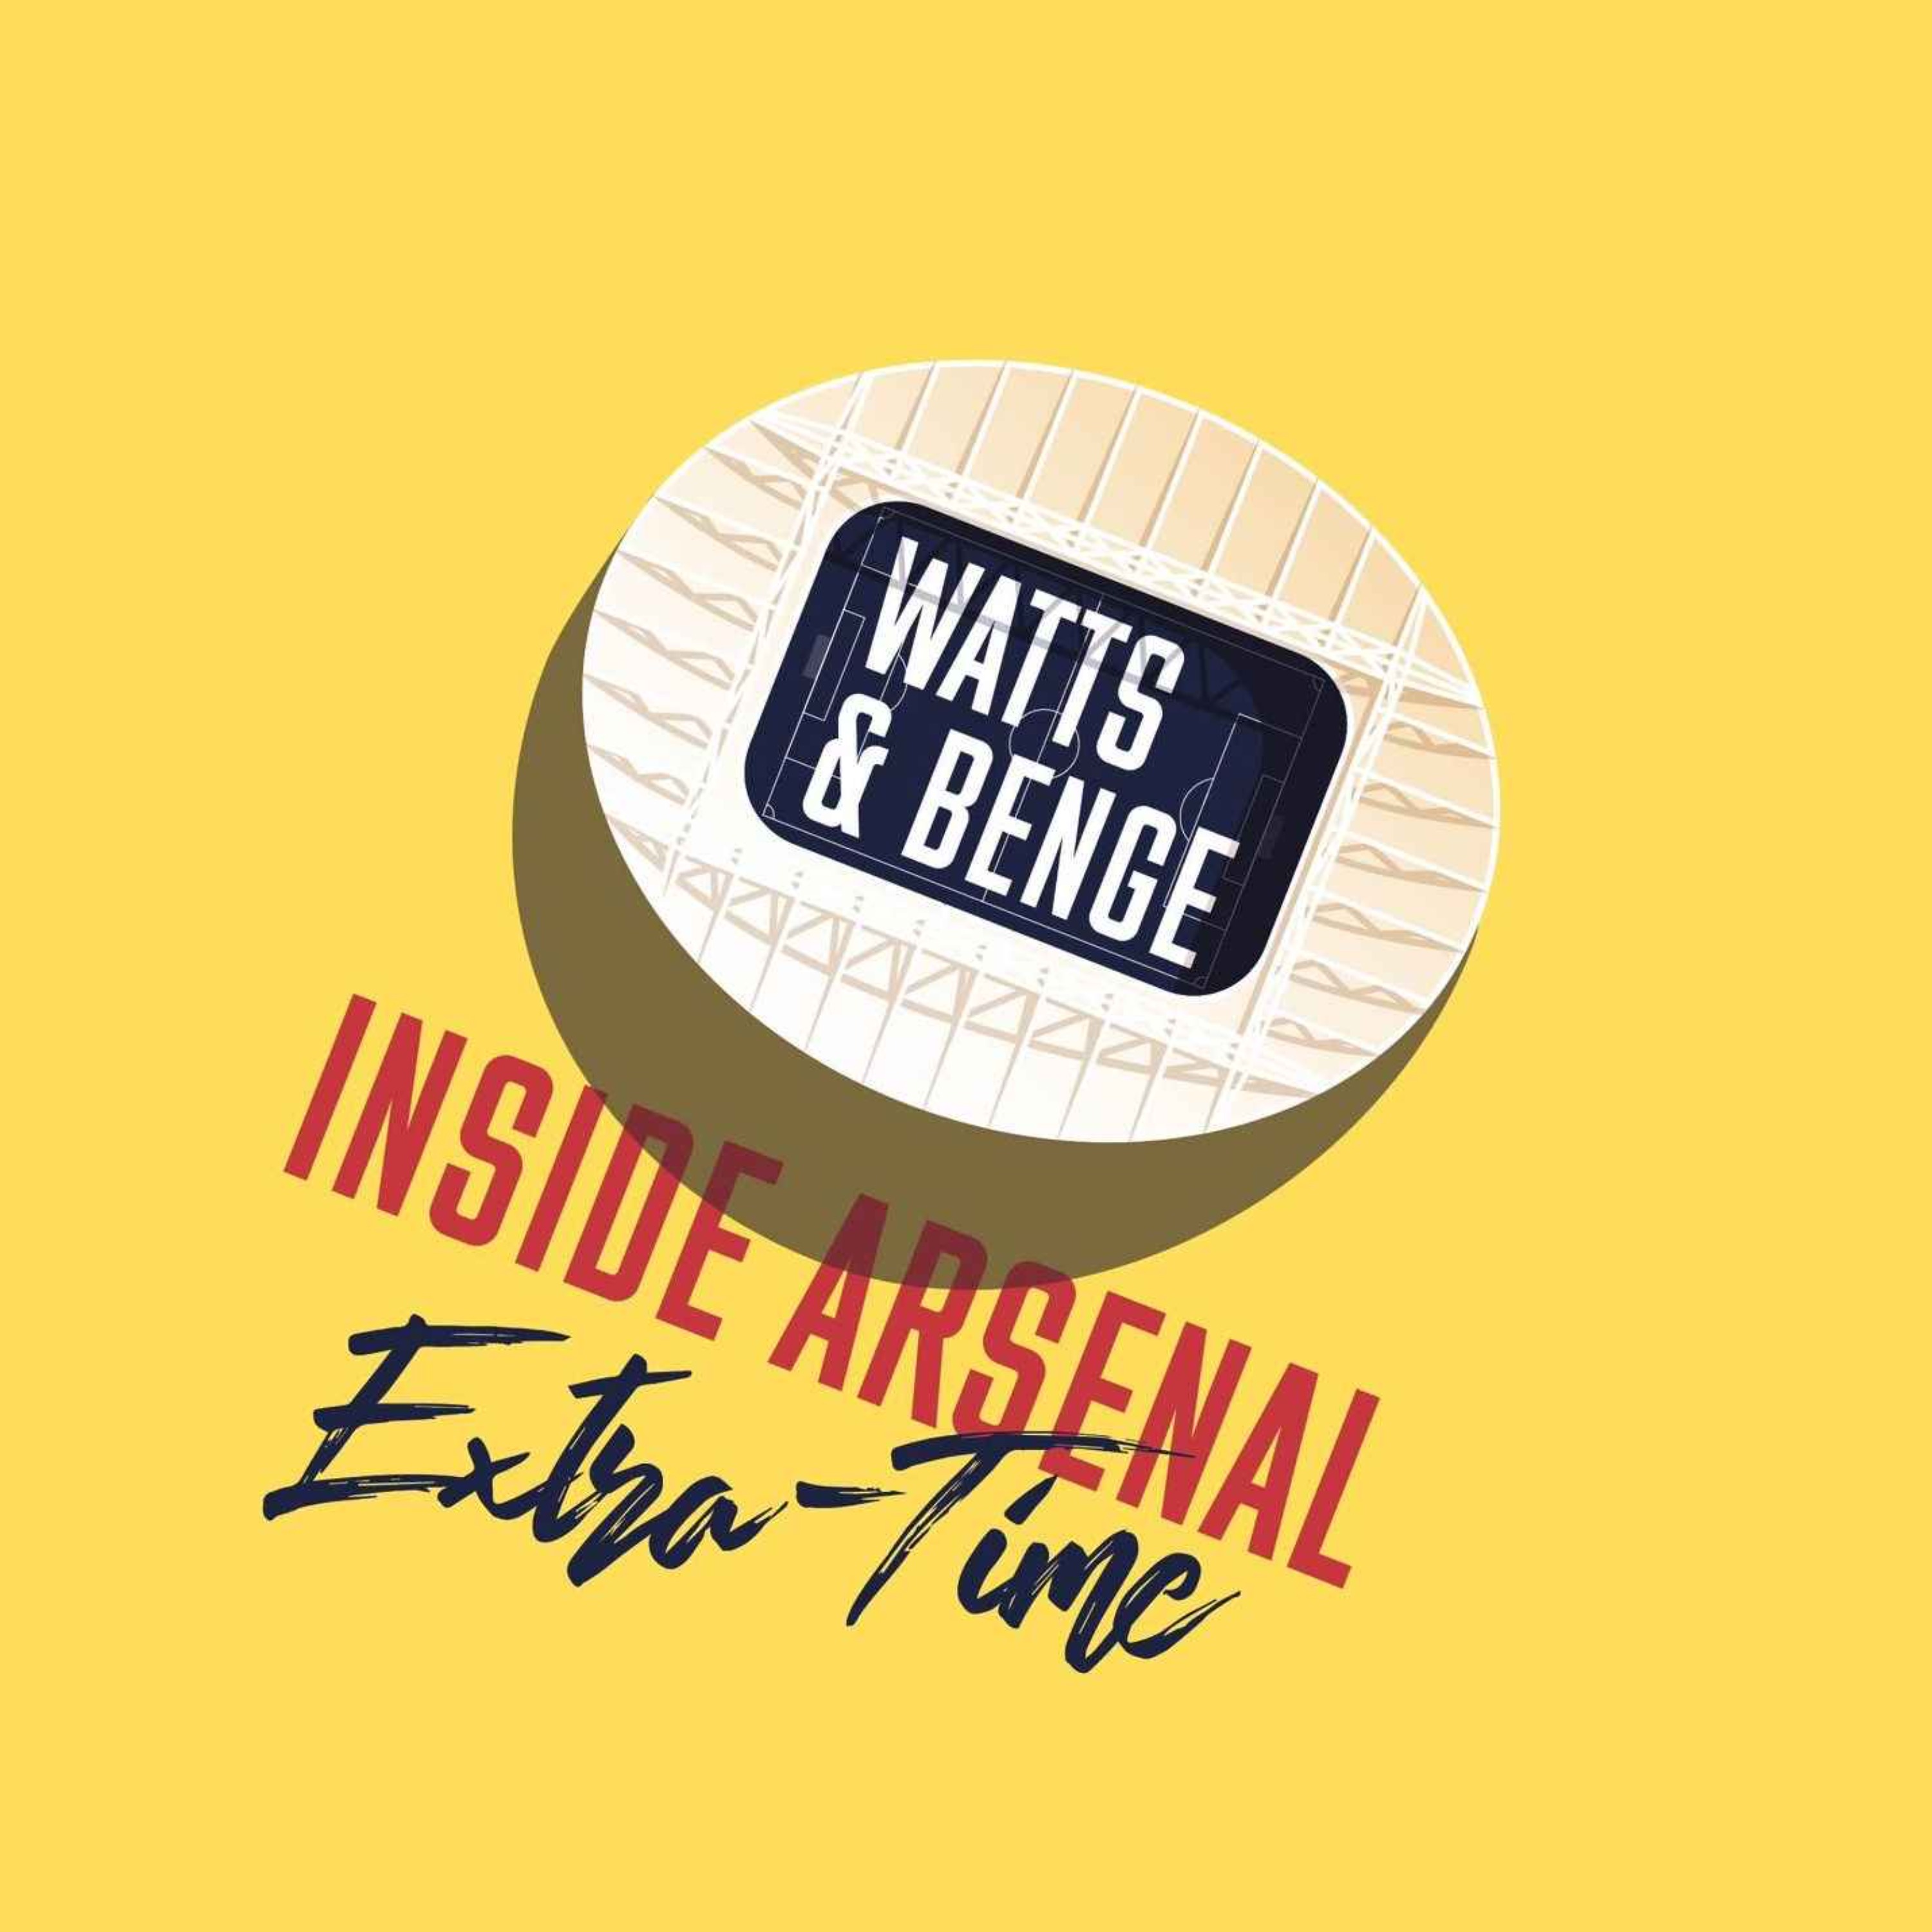 Extra-time with James Benge - Jorginho's future + Who starts vs Sheff Utd and Ben White's contract